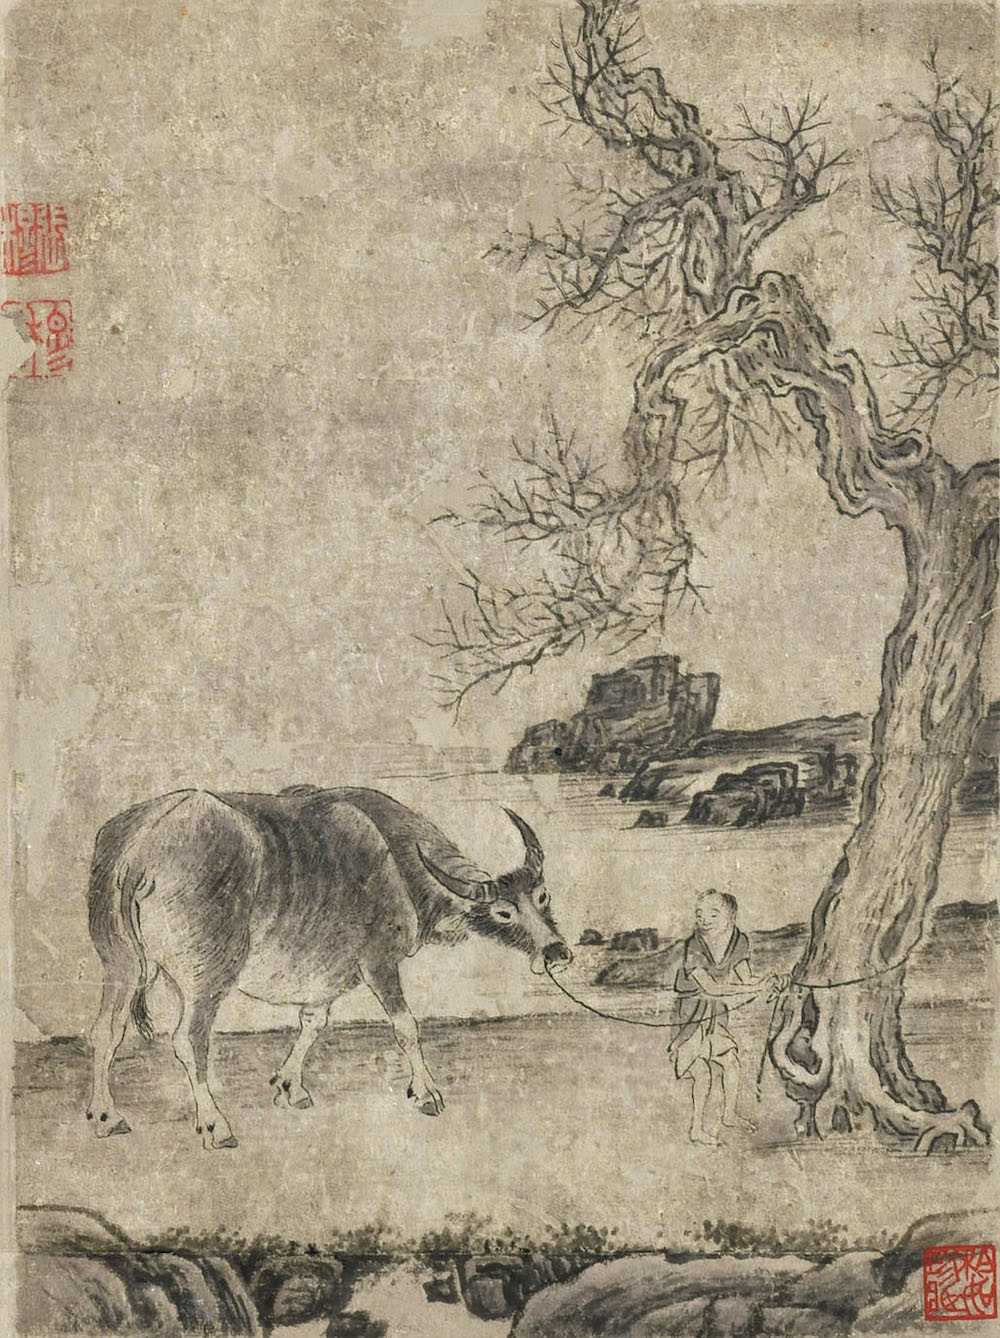 (Ming) Zhang Mu, Cattle Cattle Atlas, Looking Back, Ink and color on paper, 23.7 cm long, 17.7 cm wide, donated by Mr. Yang Quan, collected by Guangzhou Art Museum